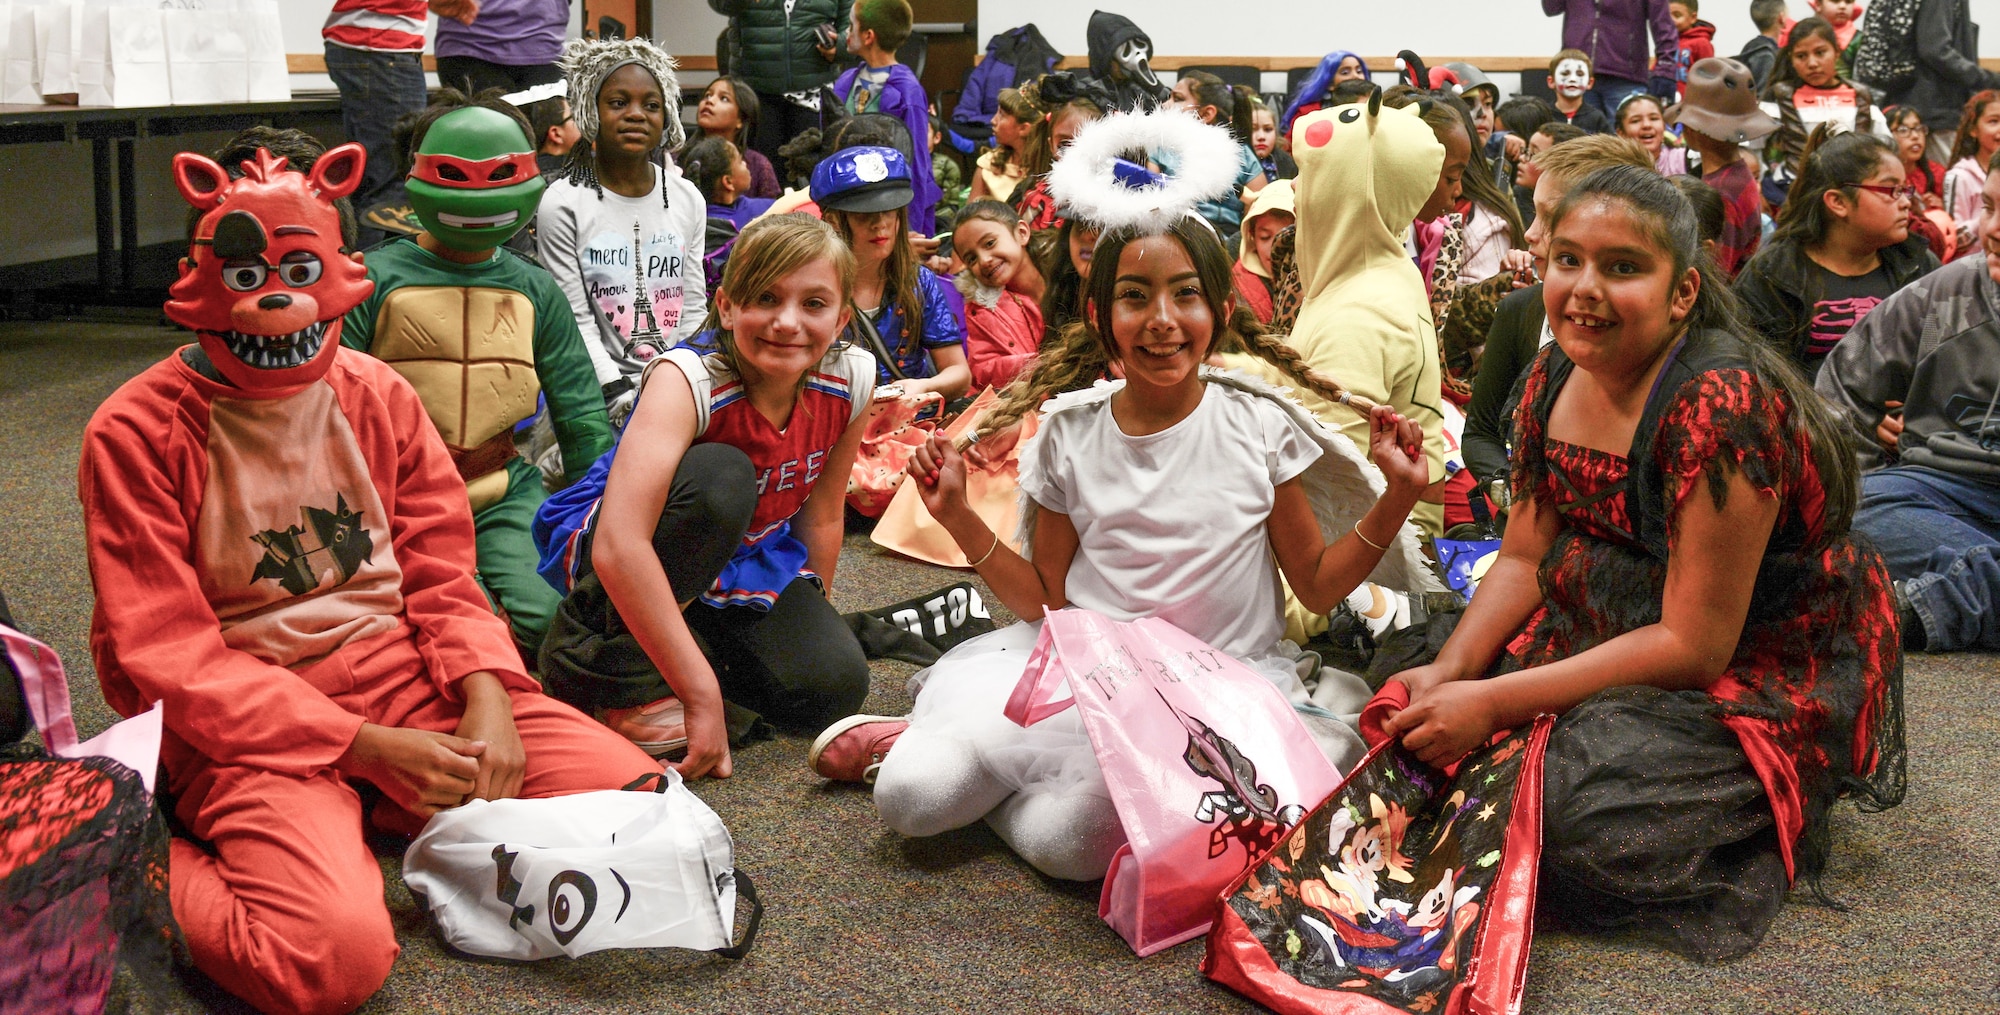 A group of Kirtland Elementary School students pose for a photo during a trick-or-treat event on Kirtland Air Force Base, N.M., Oct. 31, 2019. Each year, SMC invites the school to their Haunted Halloween event in which the entire building is filled with spooky decorations and hundreds of pounds of candy are passed out to costumed visitors.